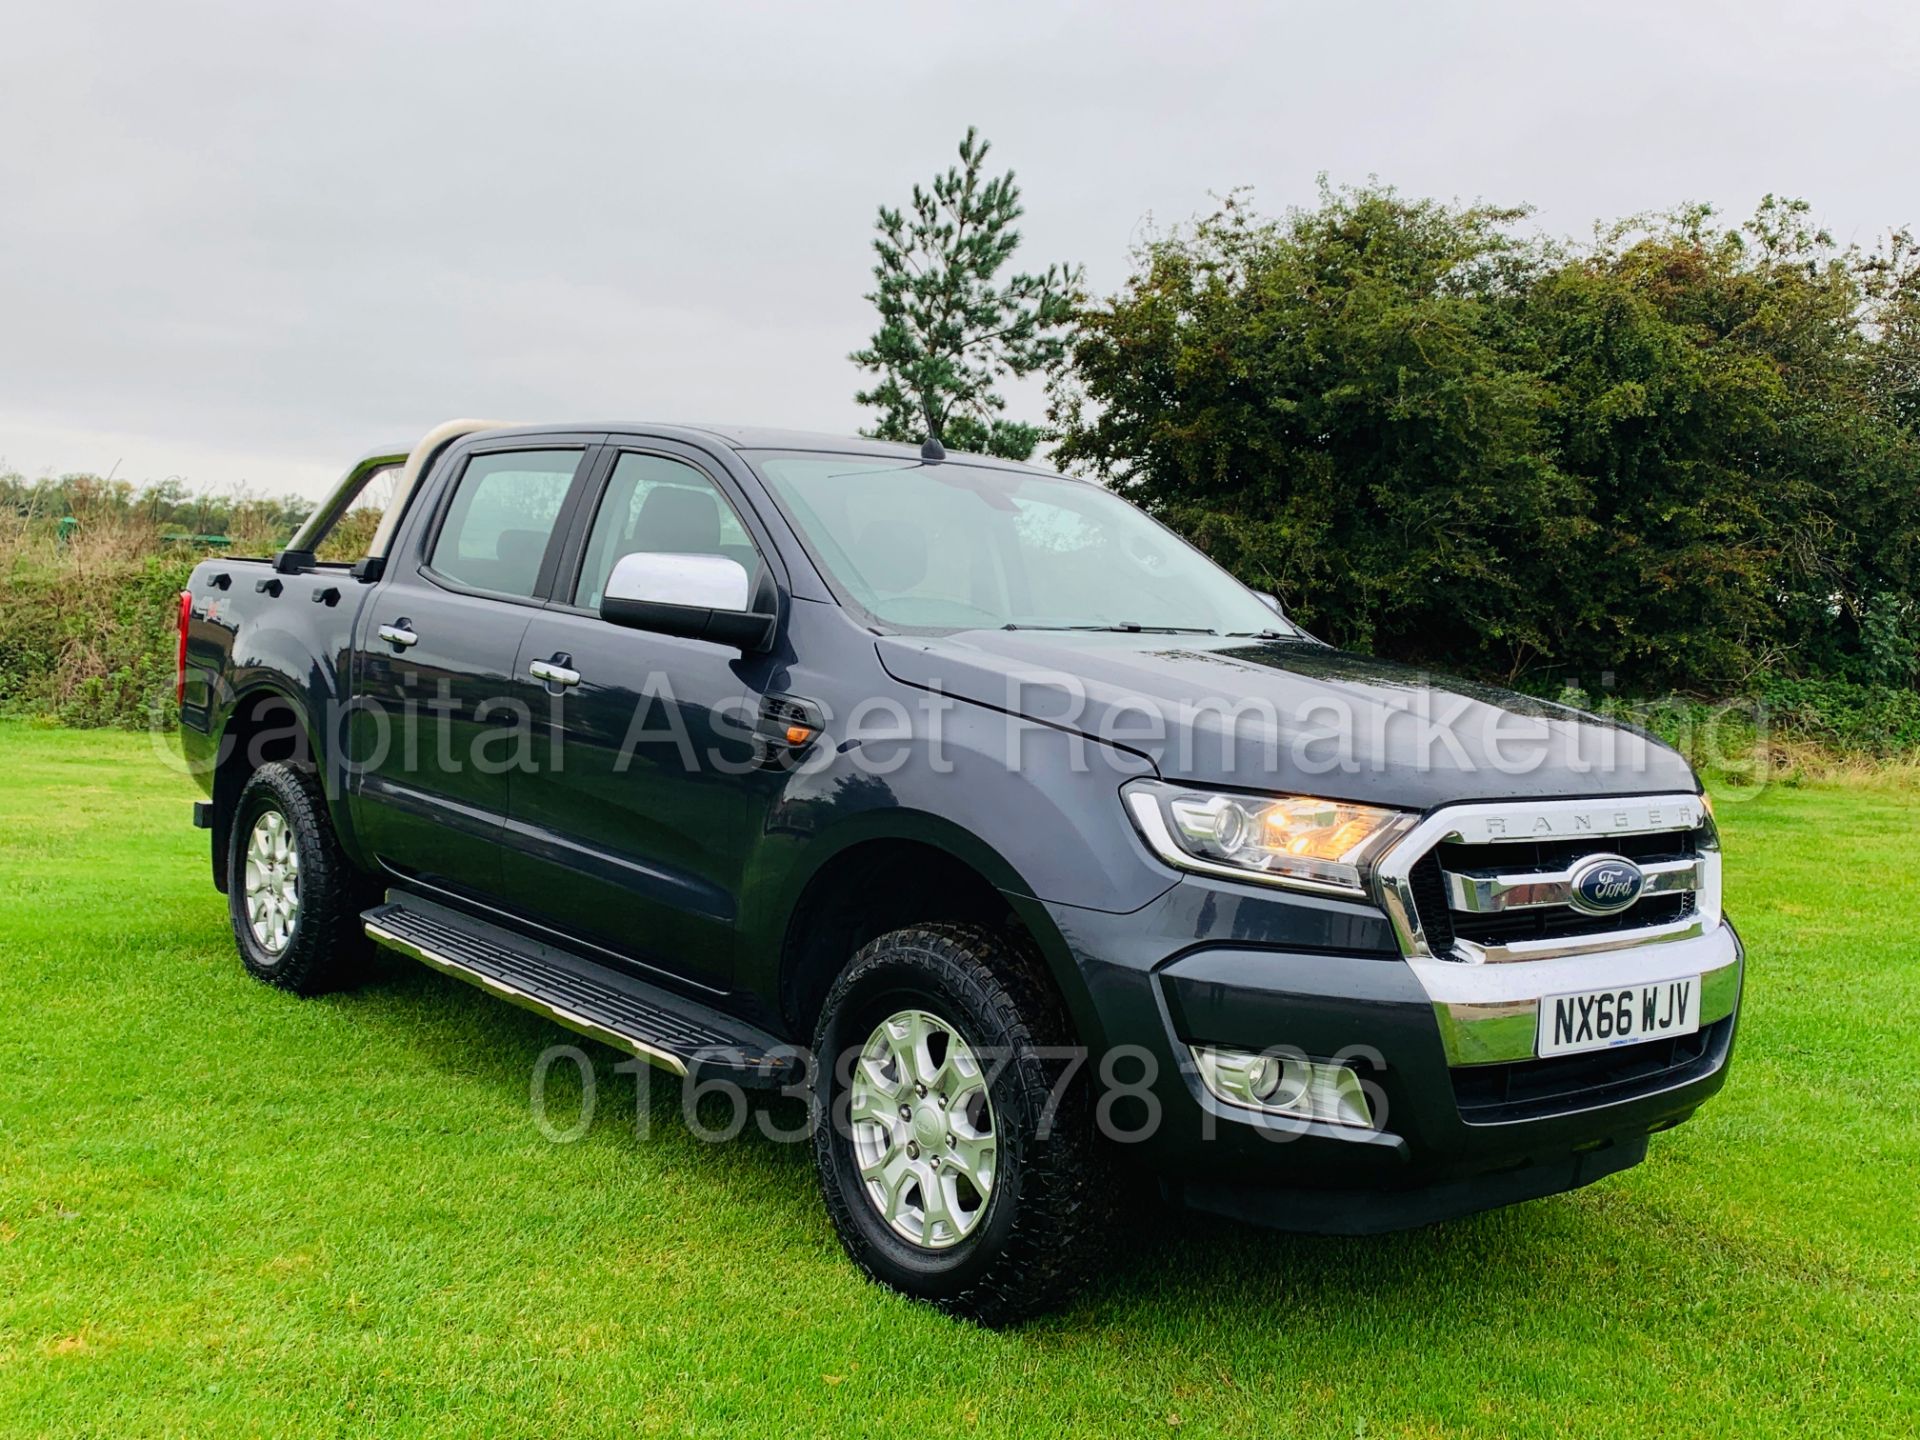 (On Sale) FORD RANGER *DOUBLE CAB - 4x4 PICK-UP* (66 REG) '2.2 TDCI - 160 BHP -6 SPEED' (1 OWNER) - Image 3 of 51